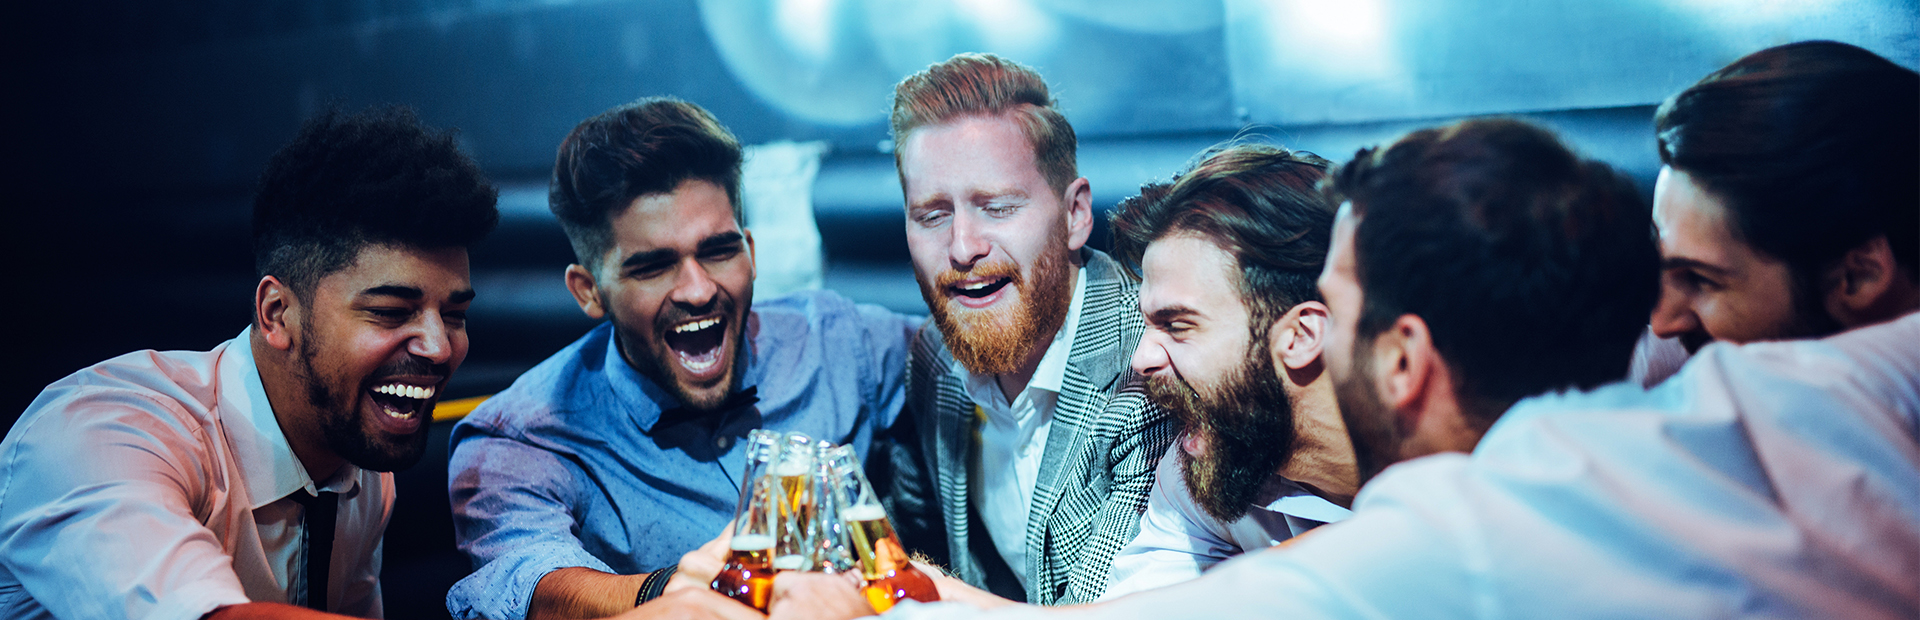 Unforgettable stag party for the groom-to-be